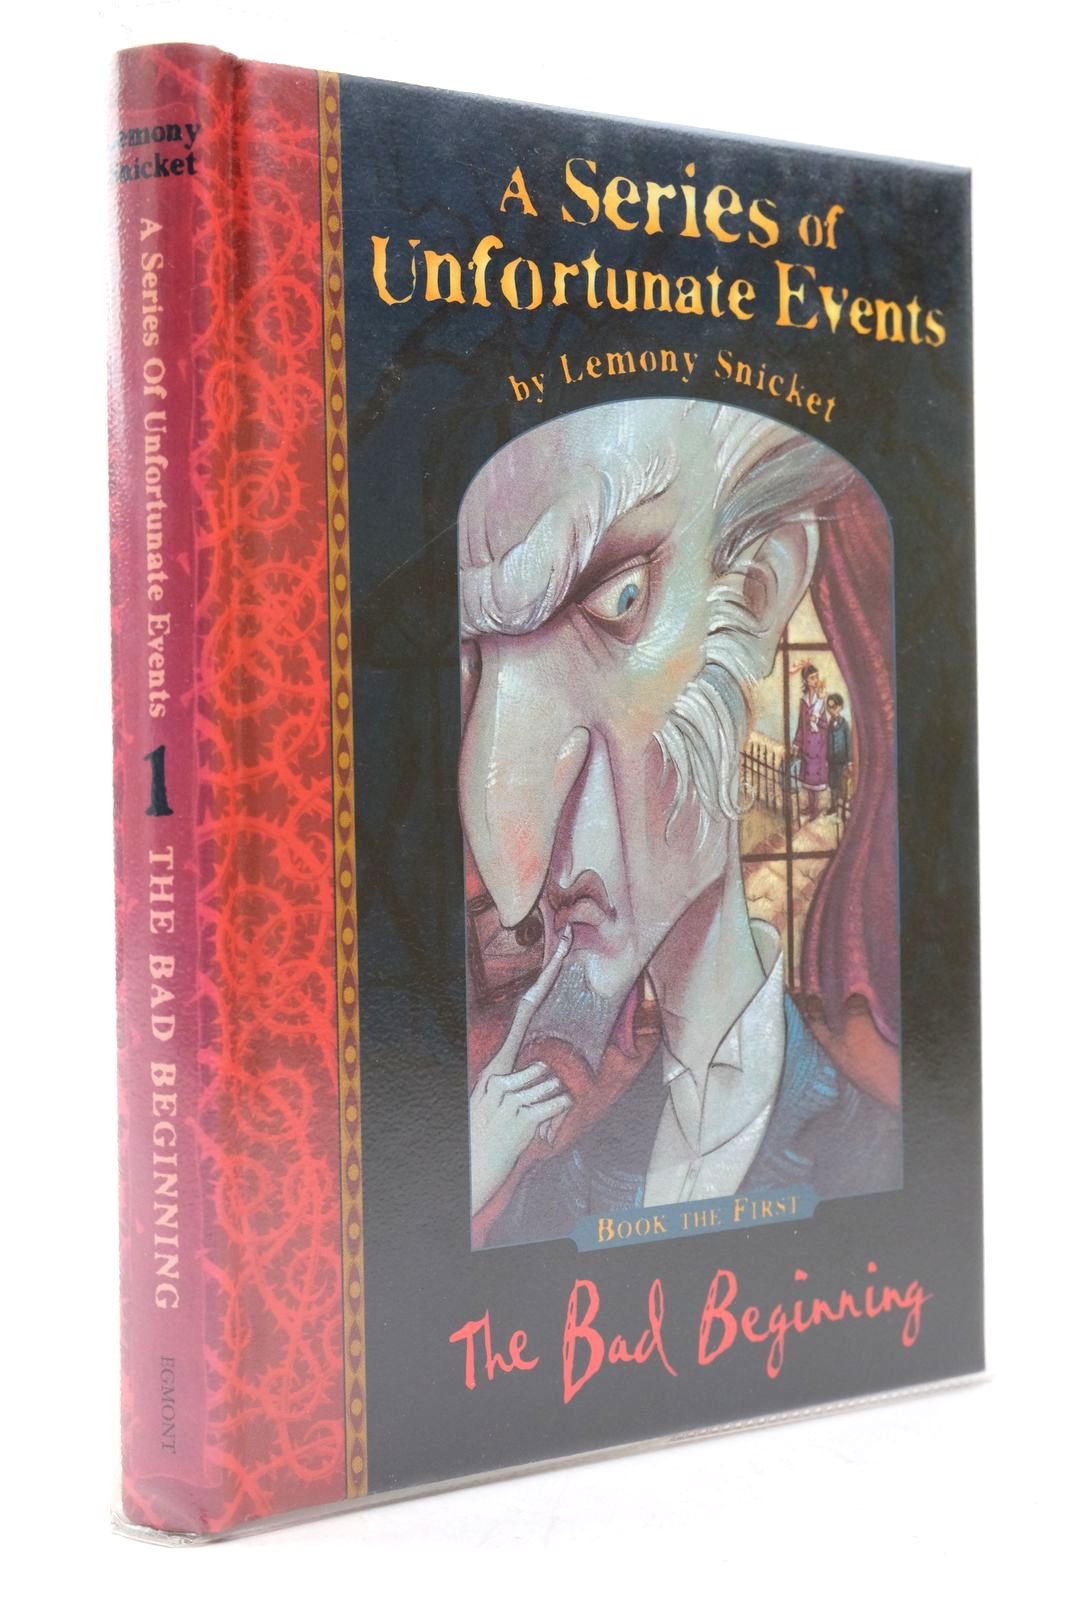 Photo of A SERIES OF UNFORTUNATE EVENTS: THE BAD BEGINNING written by Snicket, Lemony illustrated by Helquist, Brett published by Egmont Children's Books Ltd. (STOCK CODE: 2139556)  for sale by Stella & Rose's Books